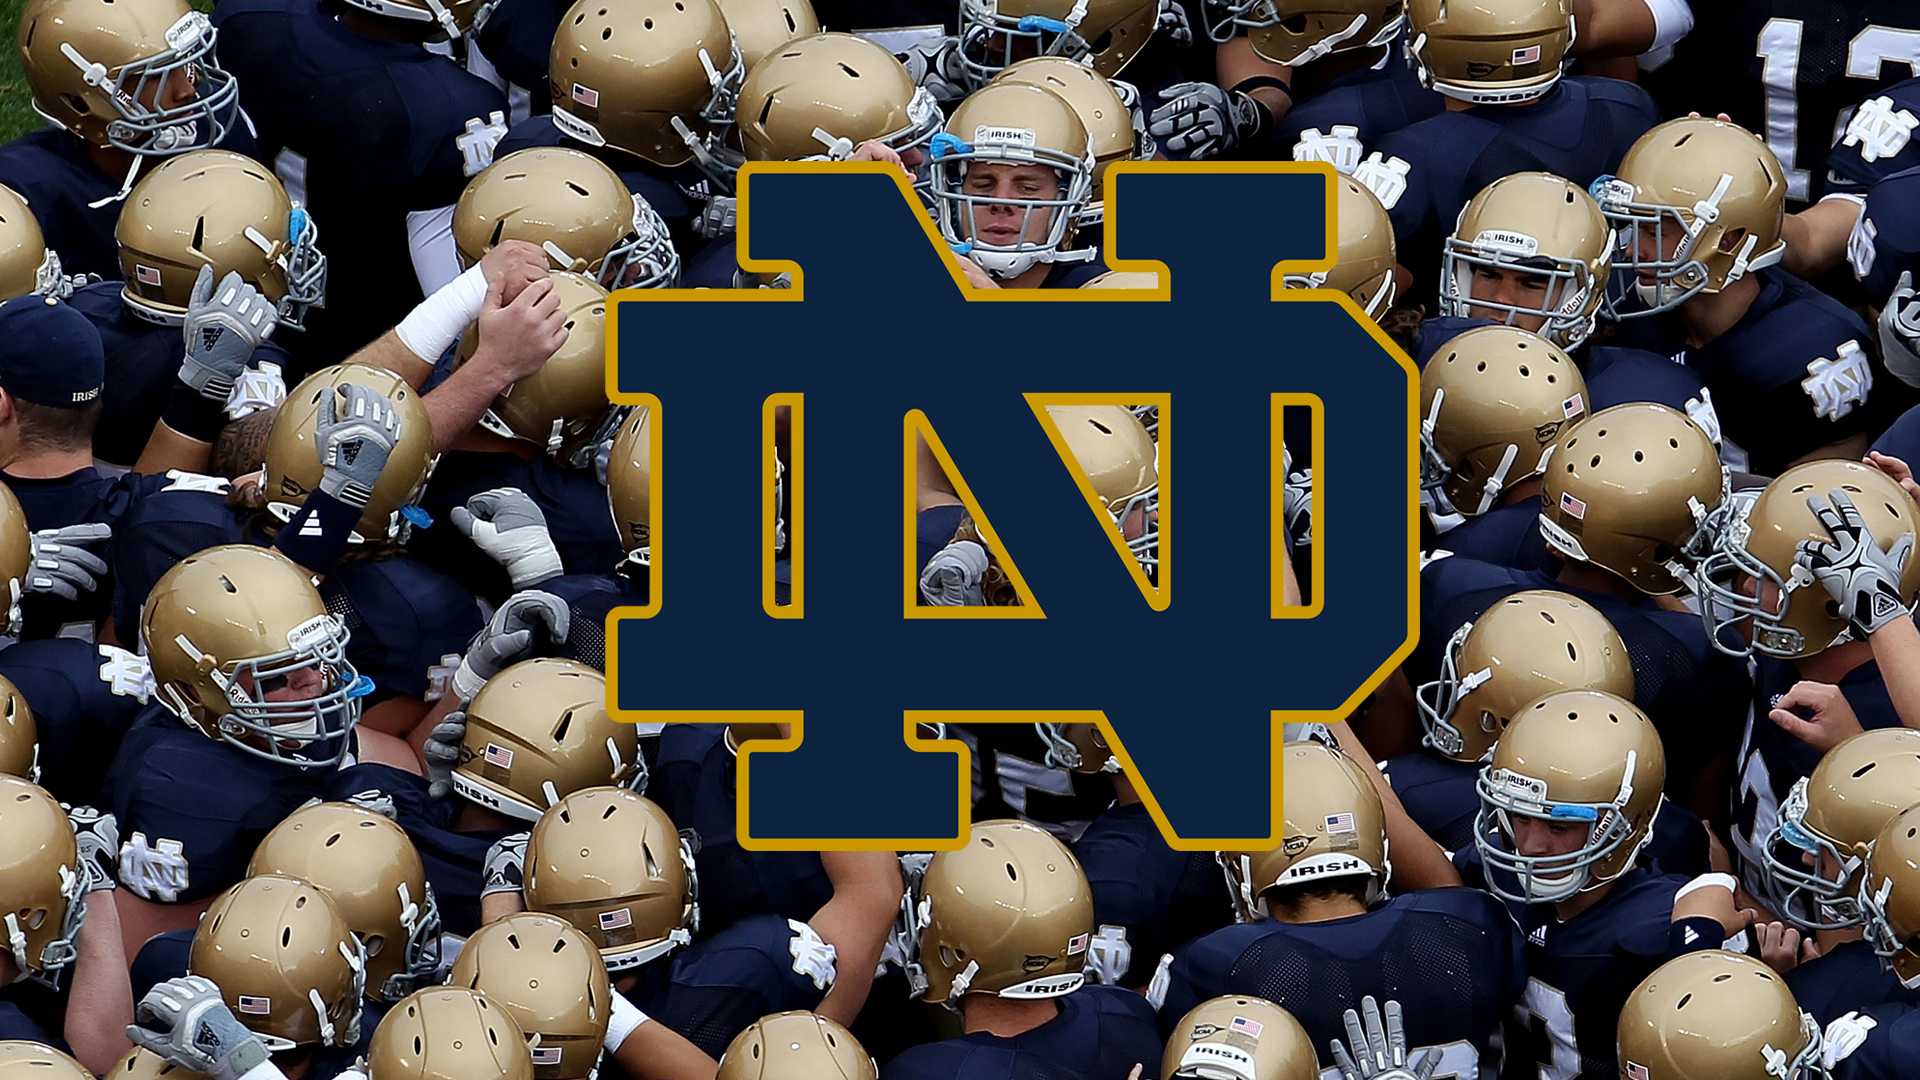 Wallpaper Full Hd Notre Dame Football football picture hd